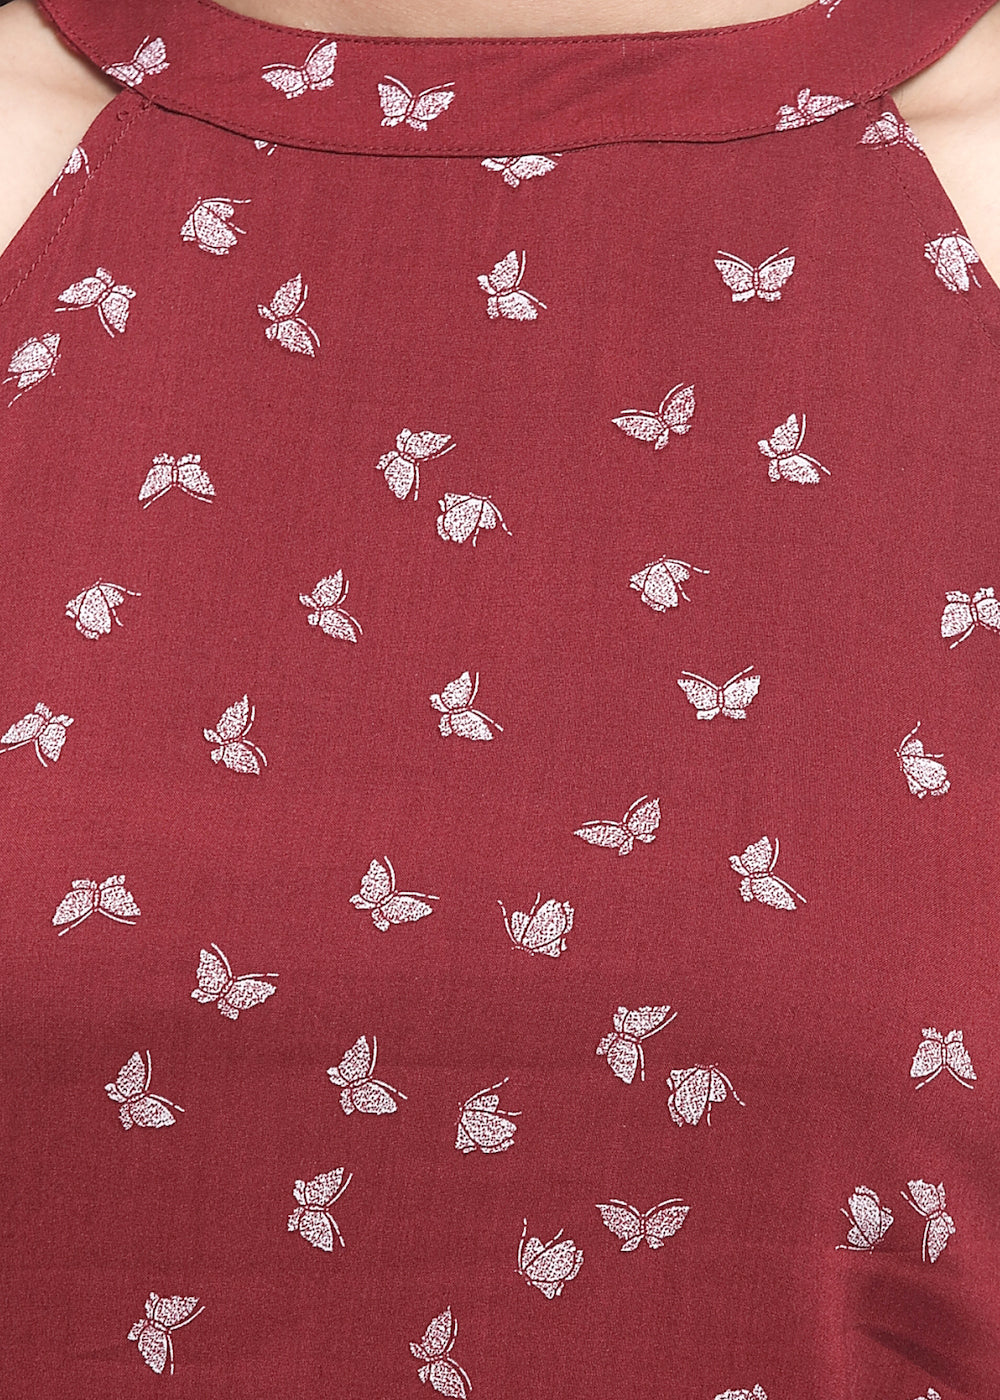 Maroon Halter Neck Top with Butterfly Print - GENZEE